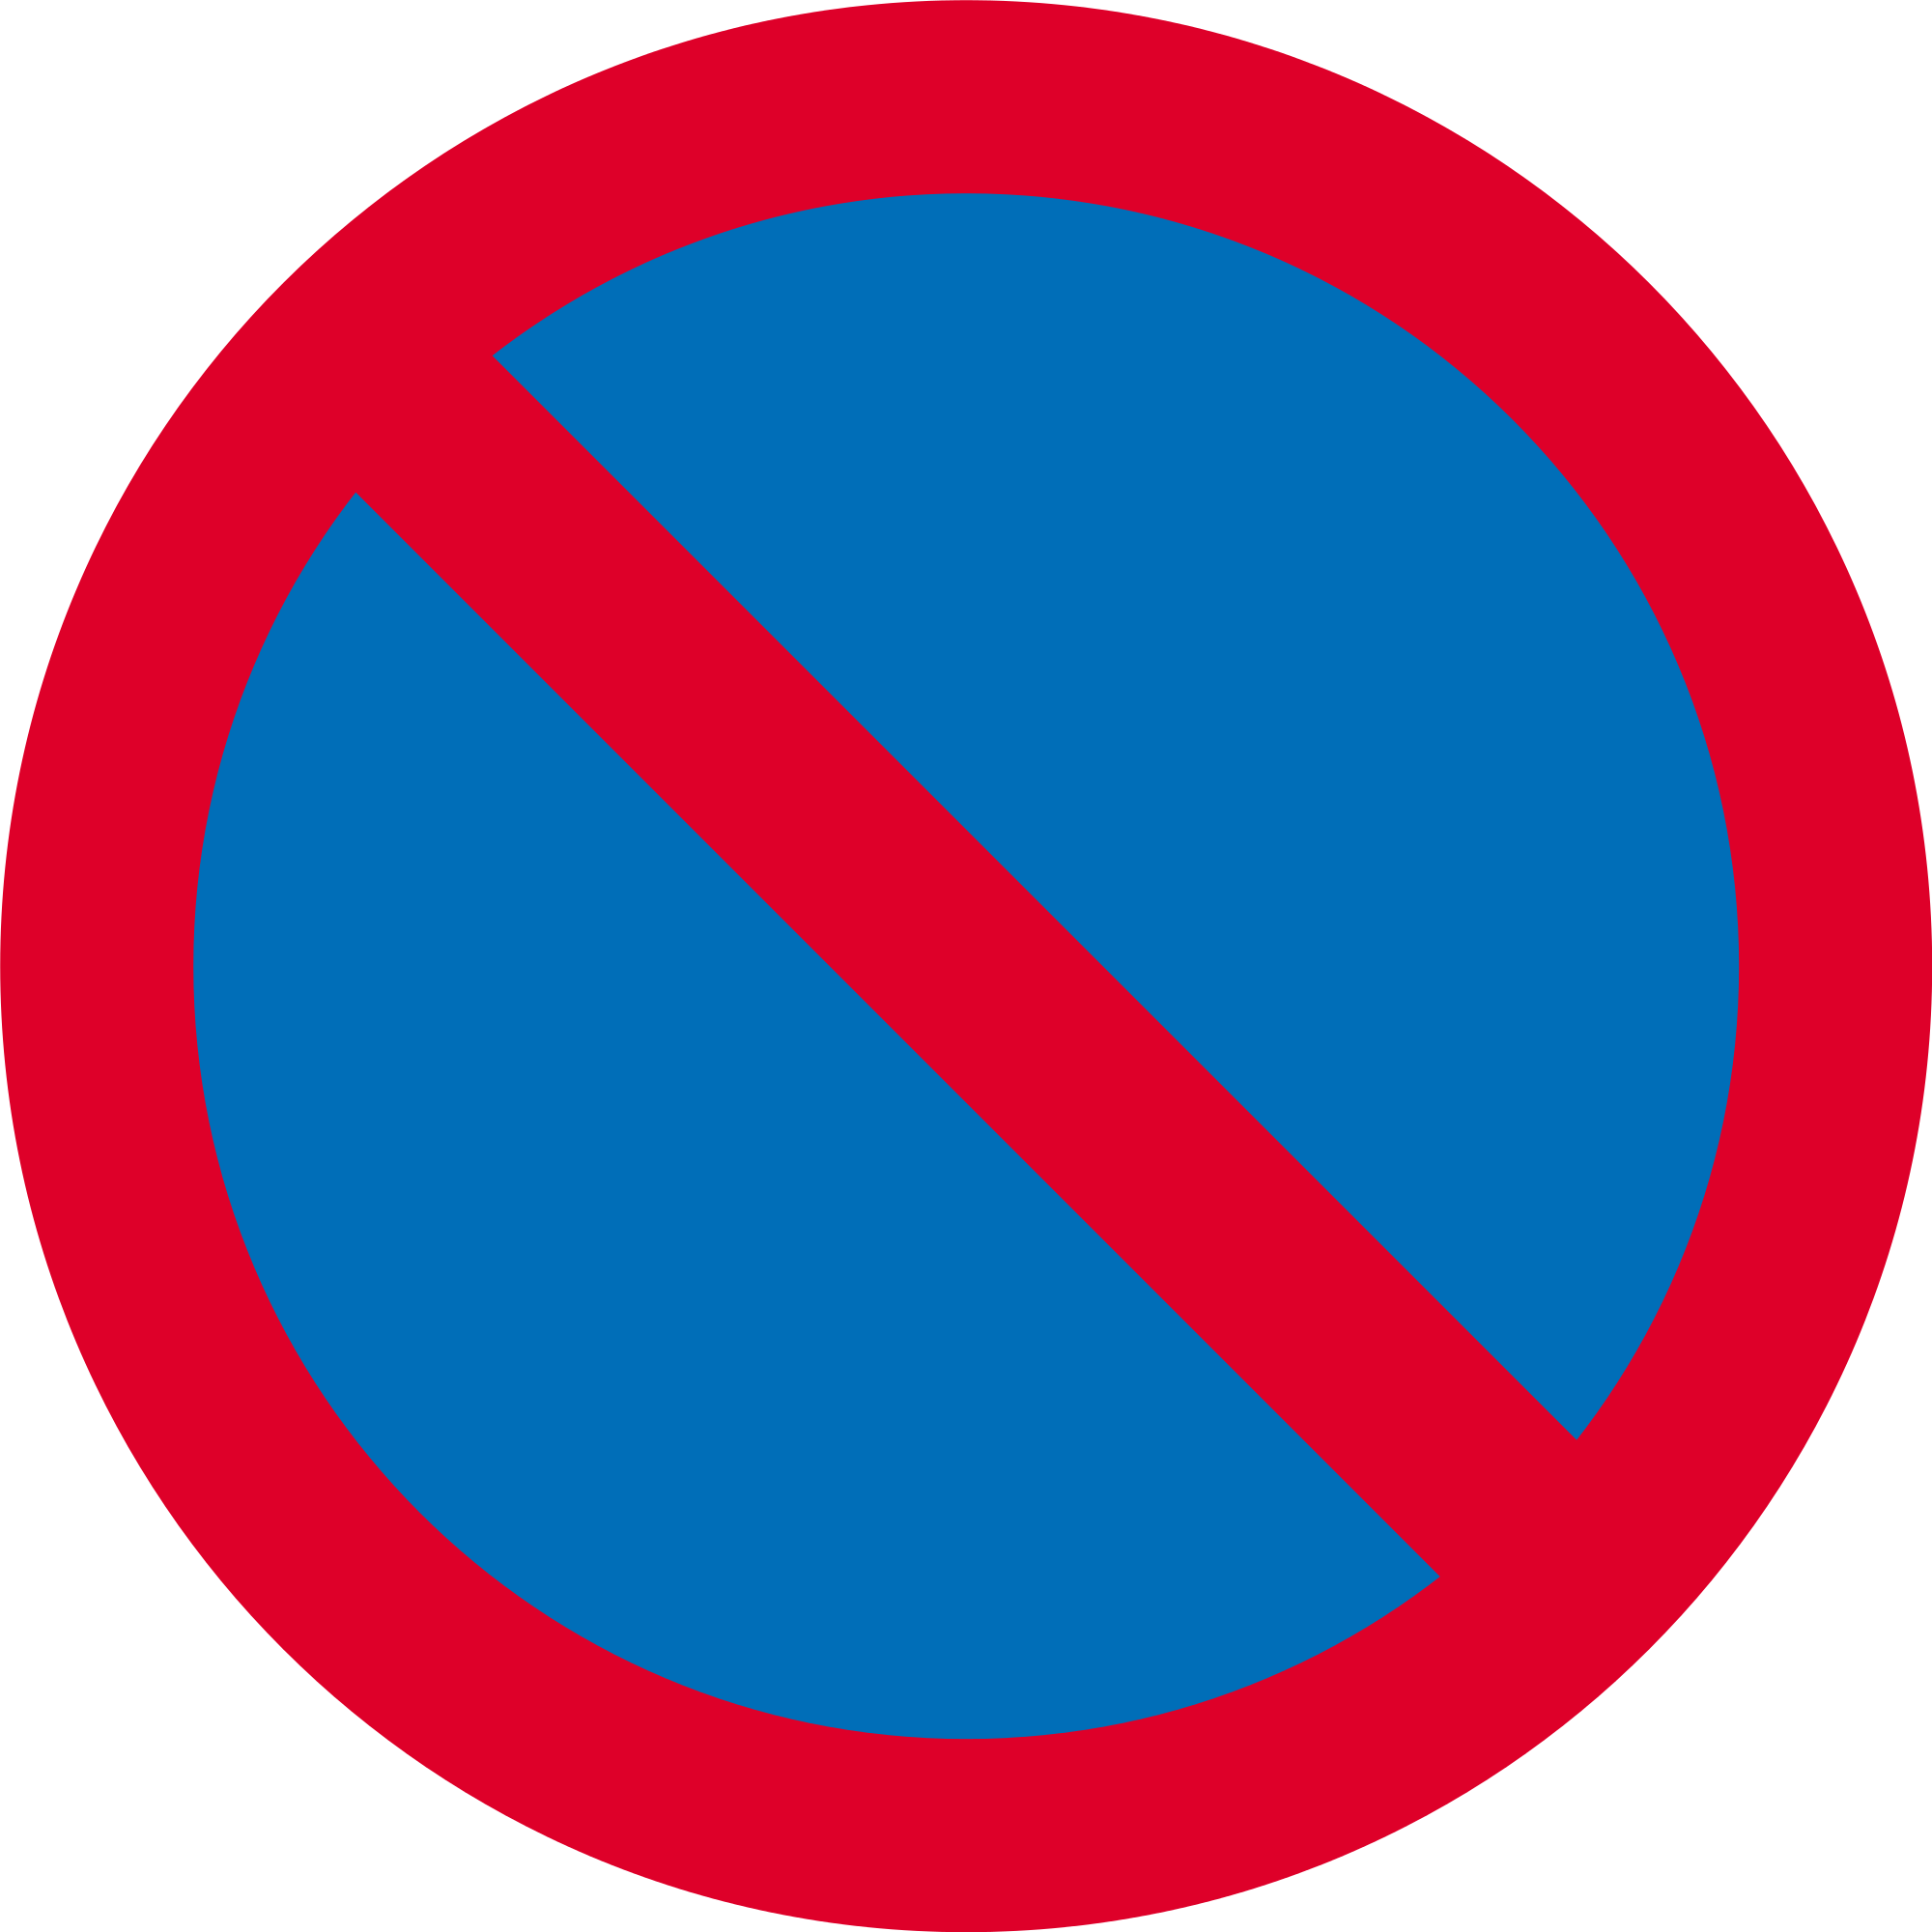 Open - Clearway No Stopping Sign (2000x2000)